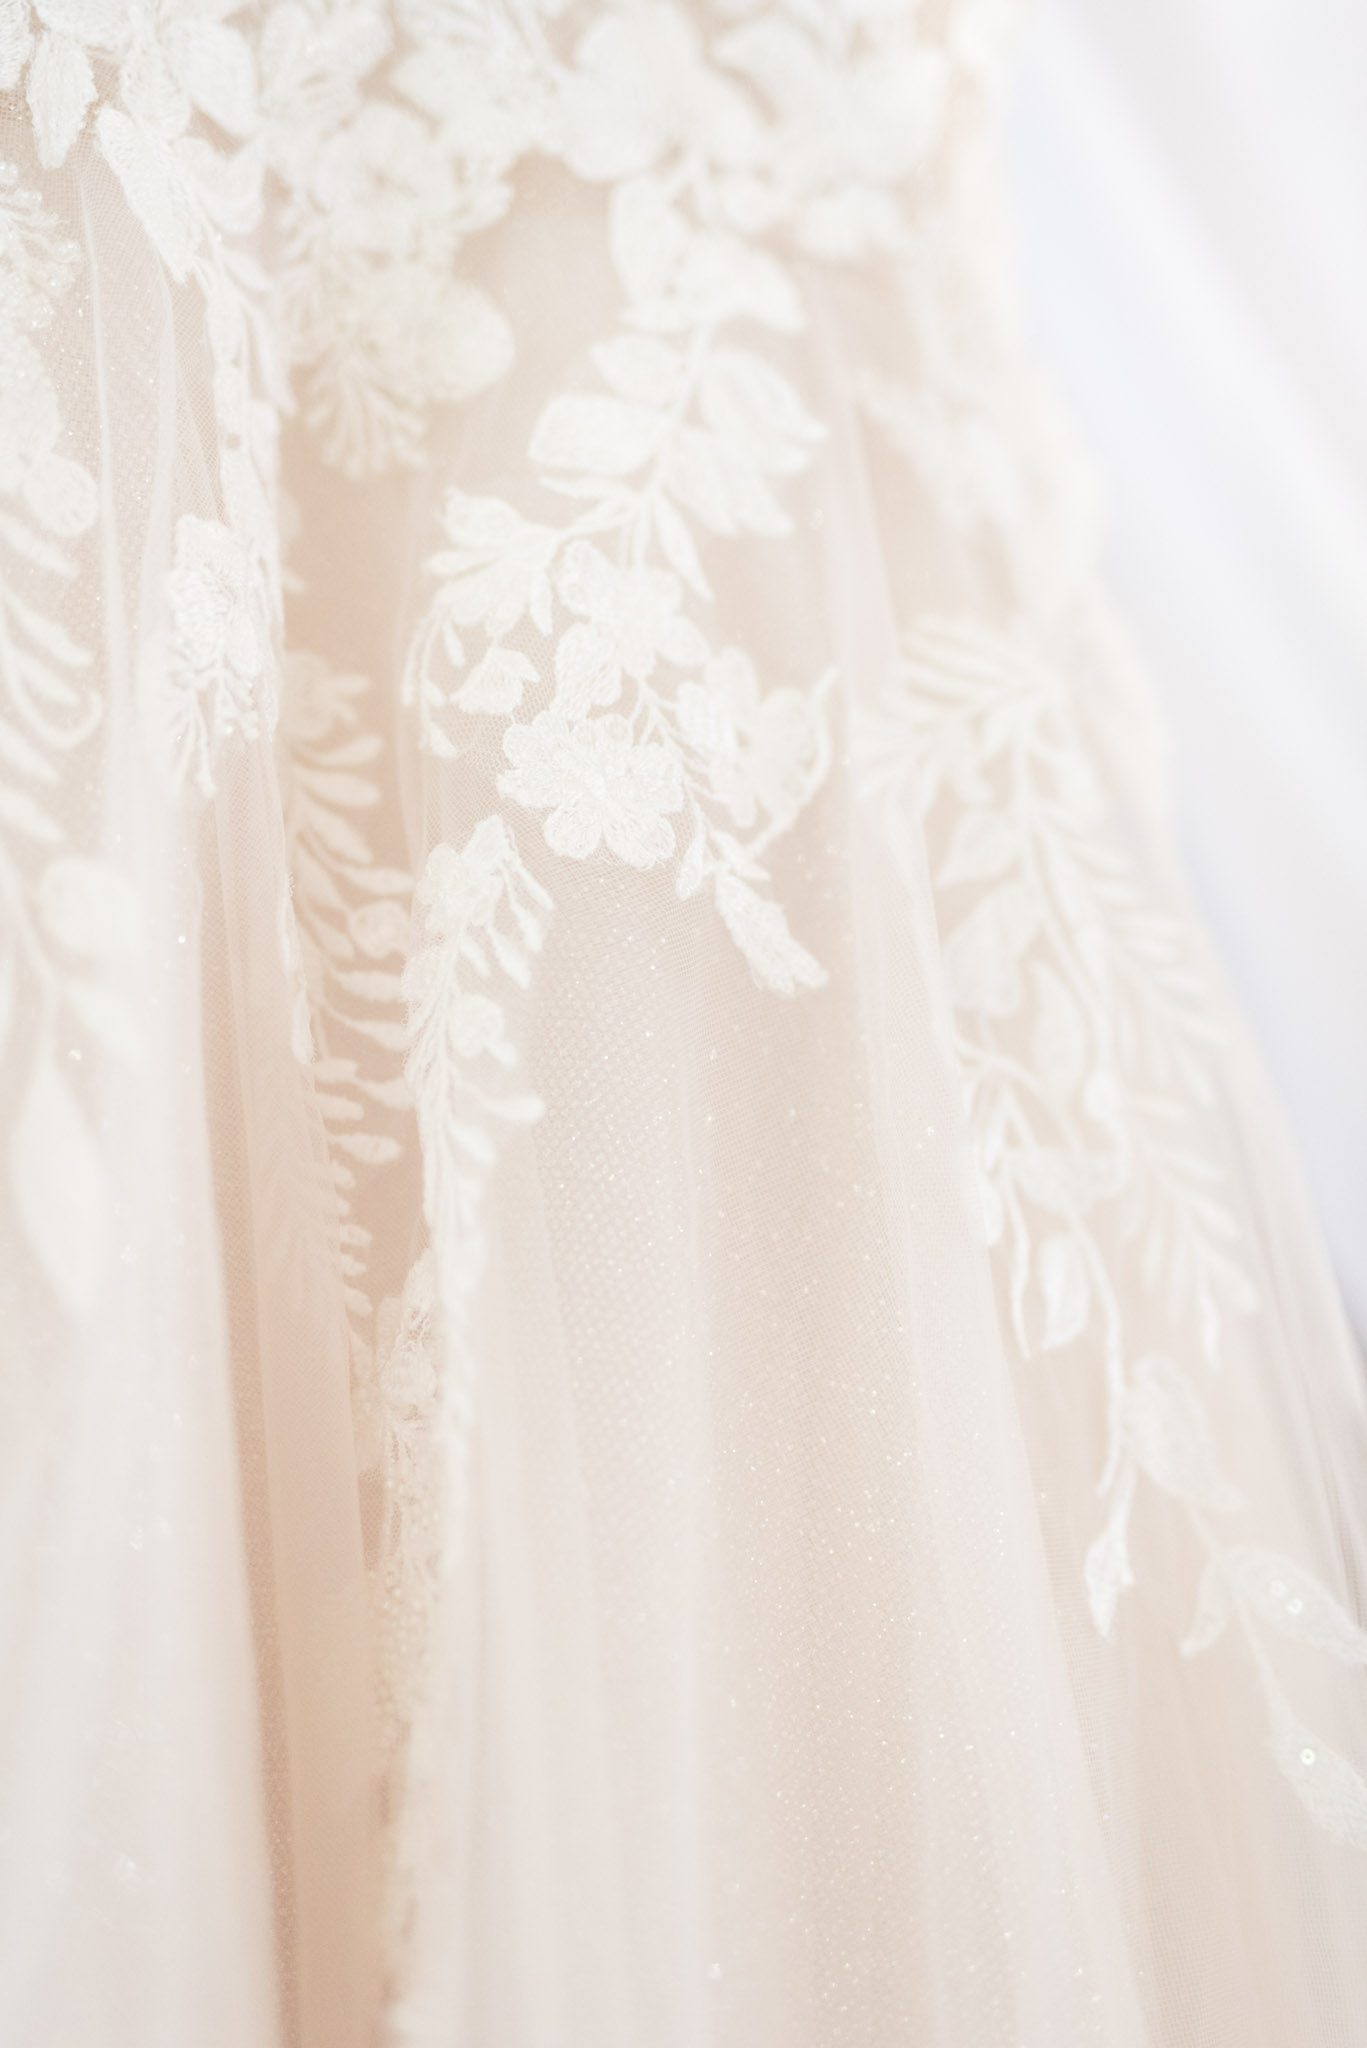 Lace detailing on wedding gown.